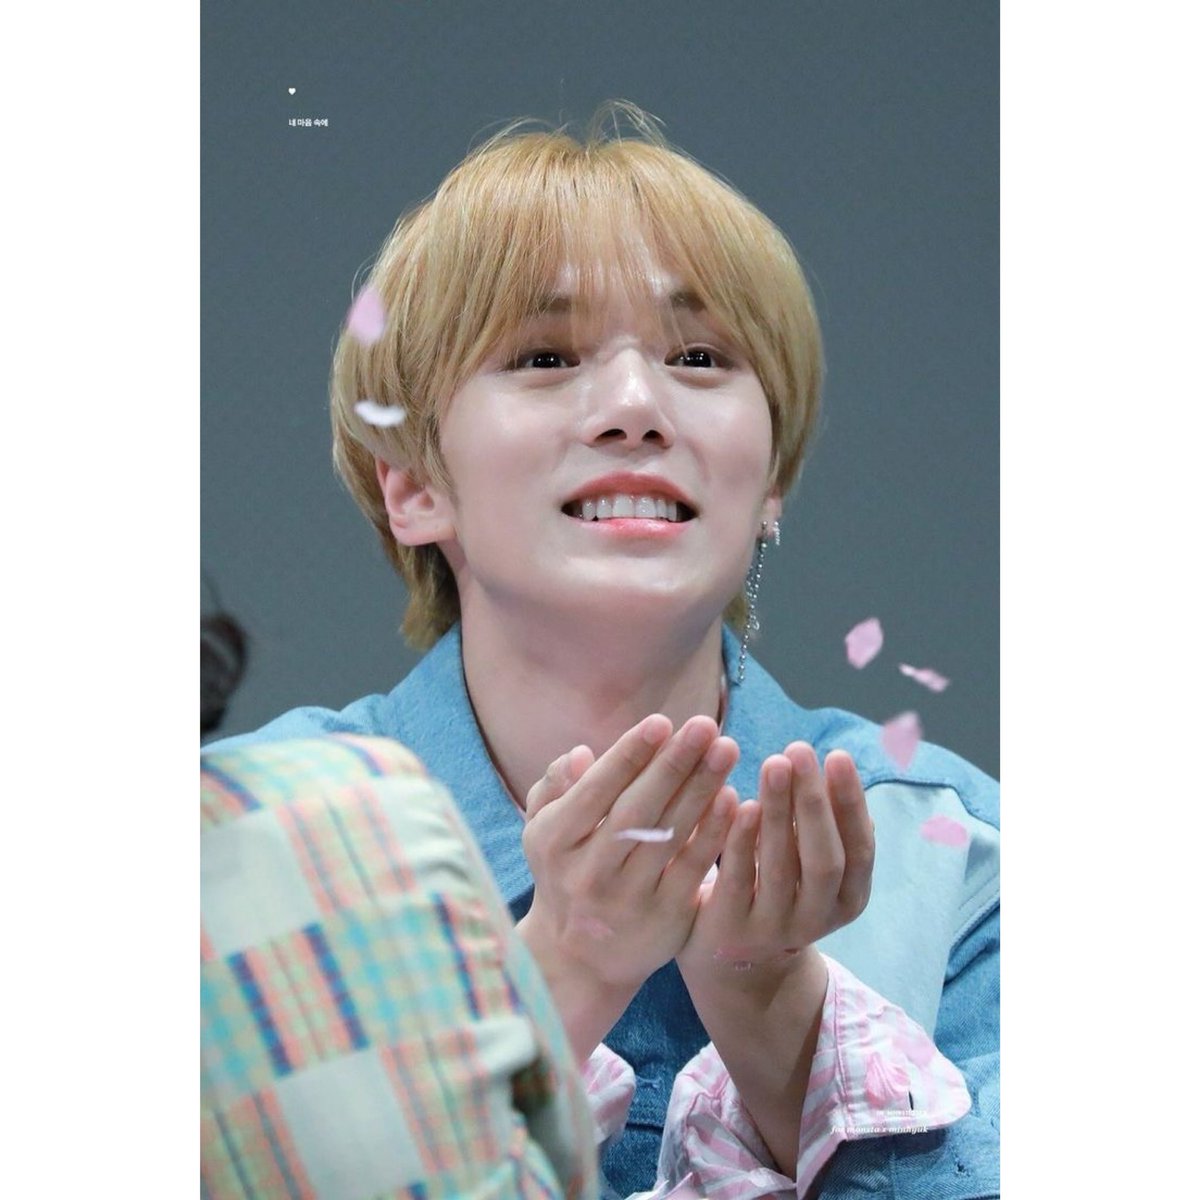 D-123 until Minhyuk gets discharged

🏠: 30. September 2024

🖼️: at an fansign

#minhyuk #MINHYUK #LeeMinhyuk #MONSTA_X #MONSTAX #MONBEBE 

Follow & turn on the 🔔 to not miss any daily countdown :)